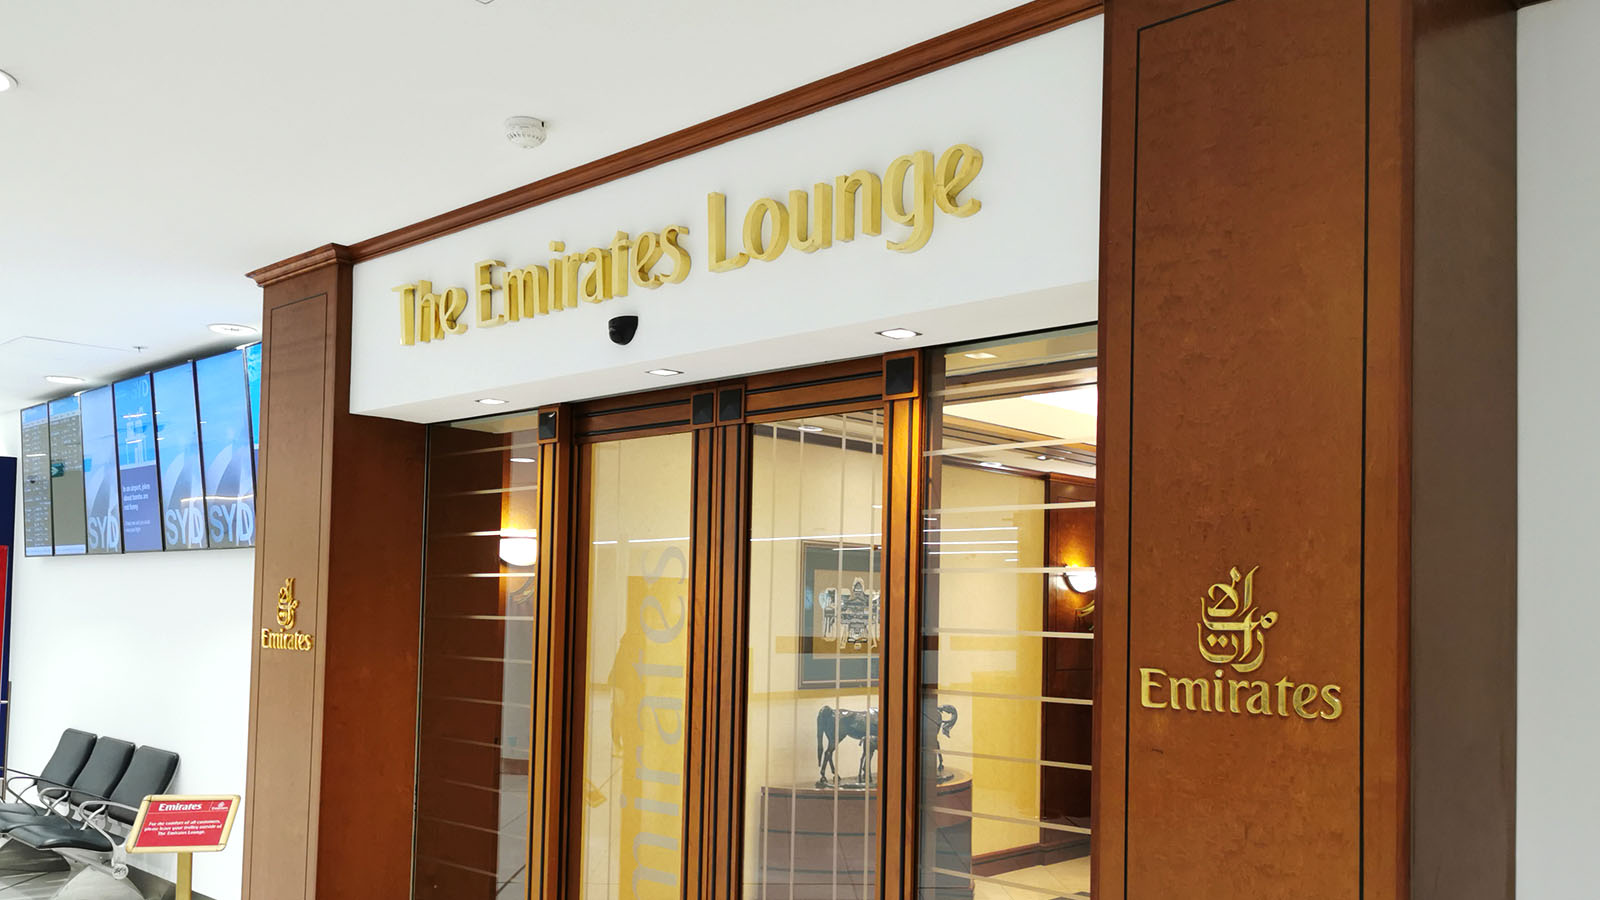 Exterior of the Emirates Lounge in Sydney